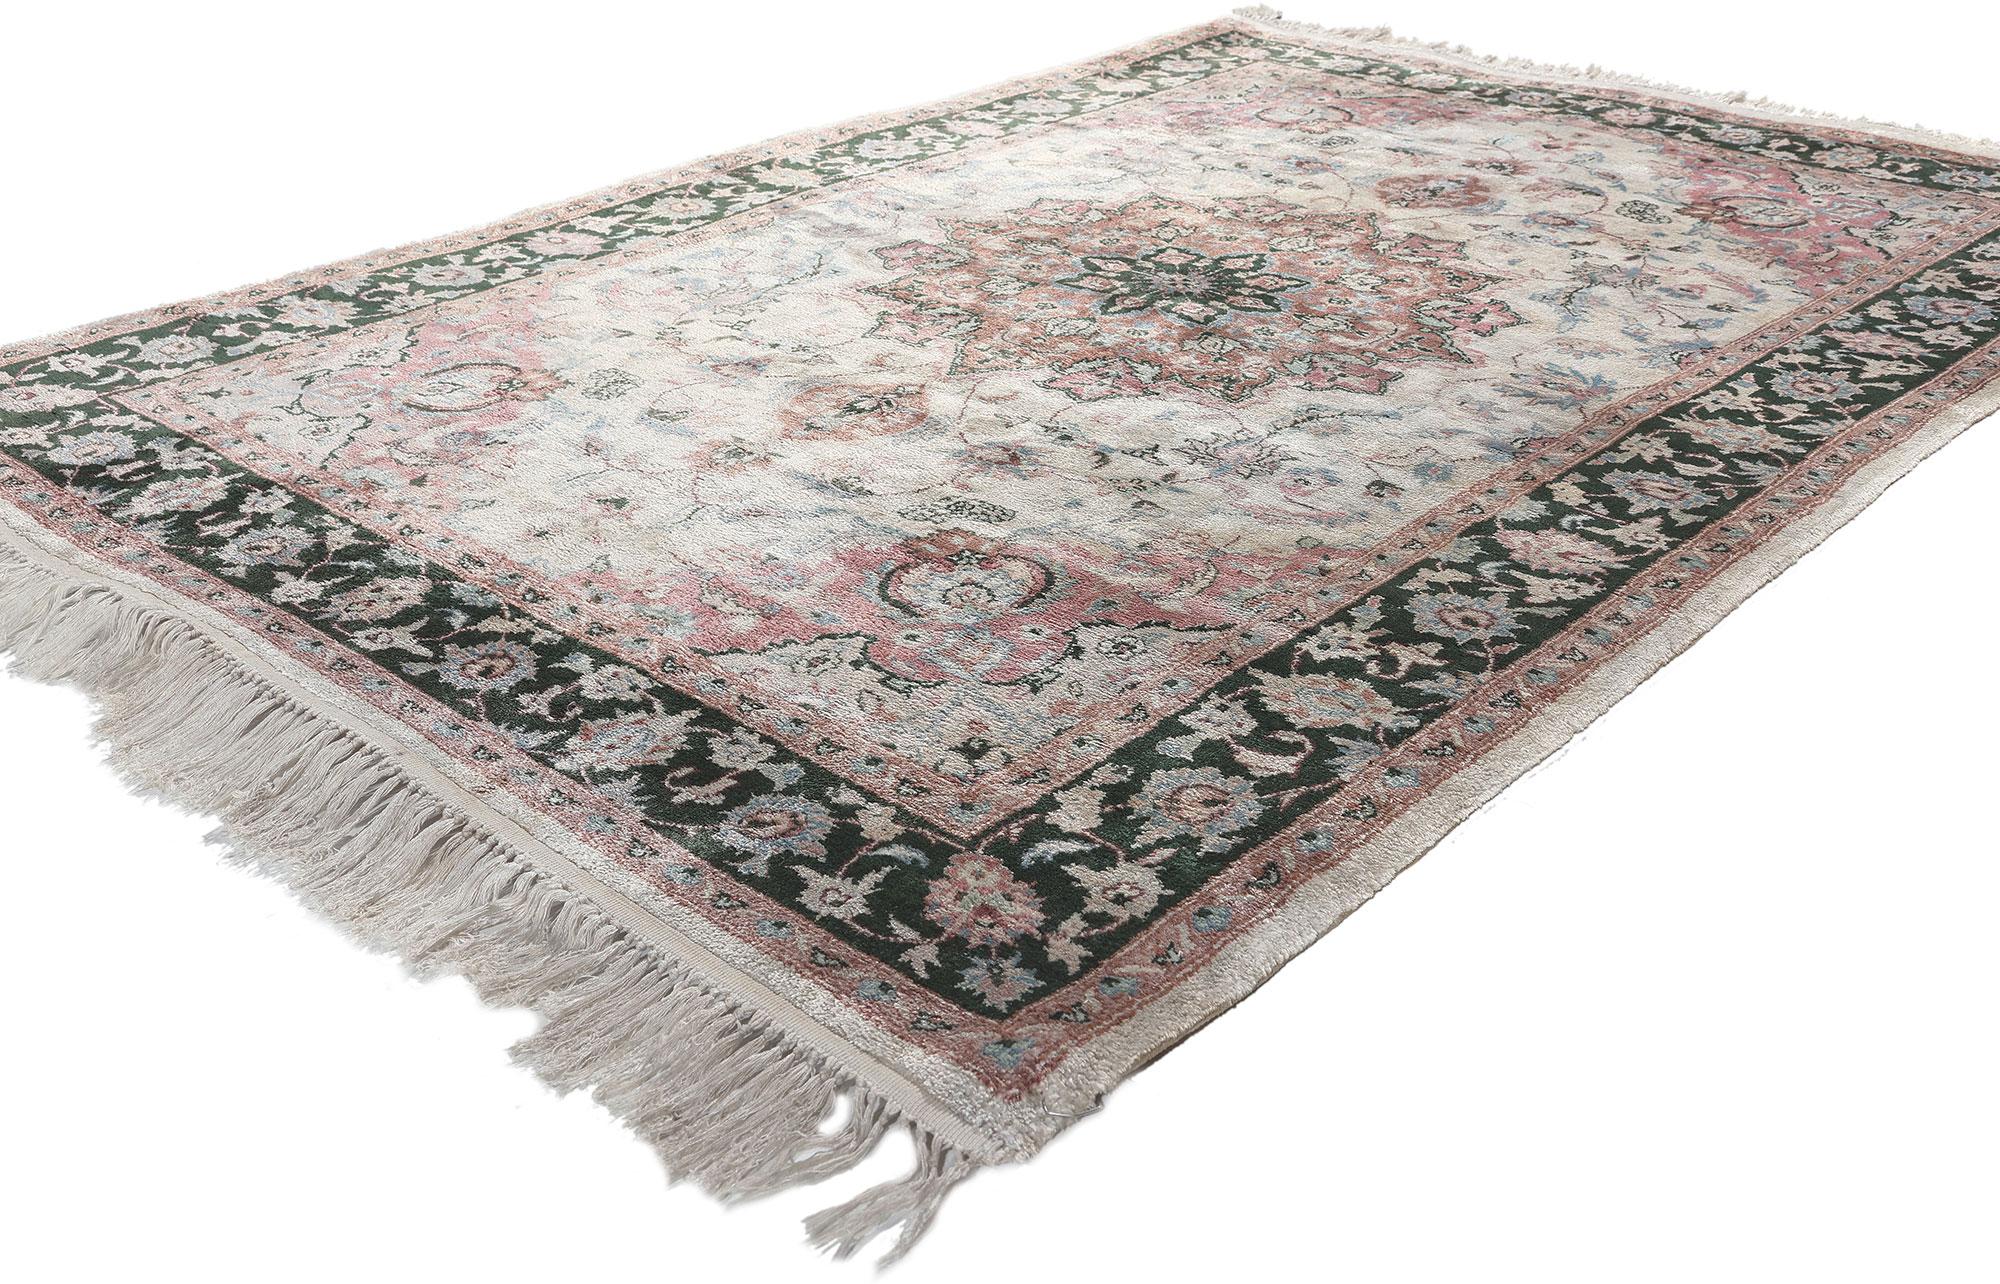 78545 Vintage Indian Kashmir Rug, 04'00 x 06'00. Emulating English Country style and timeless style with a silky texture, this vintage Indian Kashmir rug is a captivating vision of woven beauty. The intricate botanical details and sophisticated